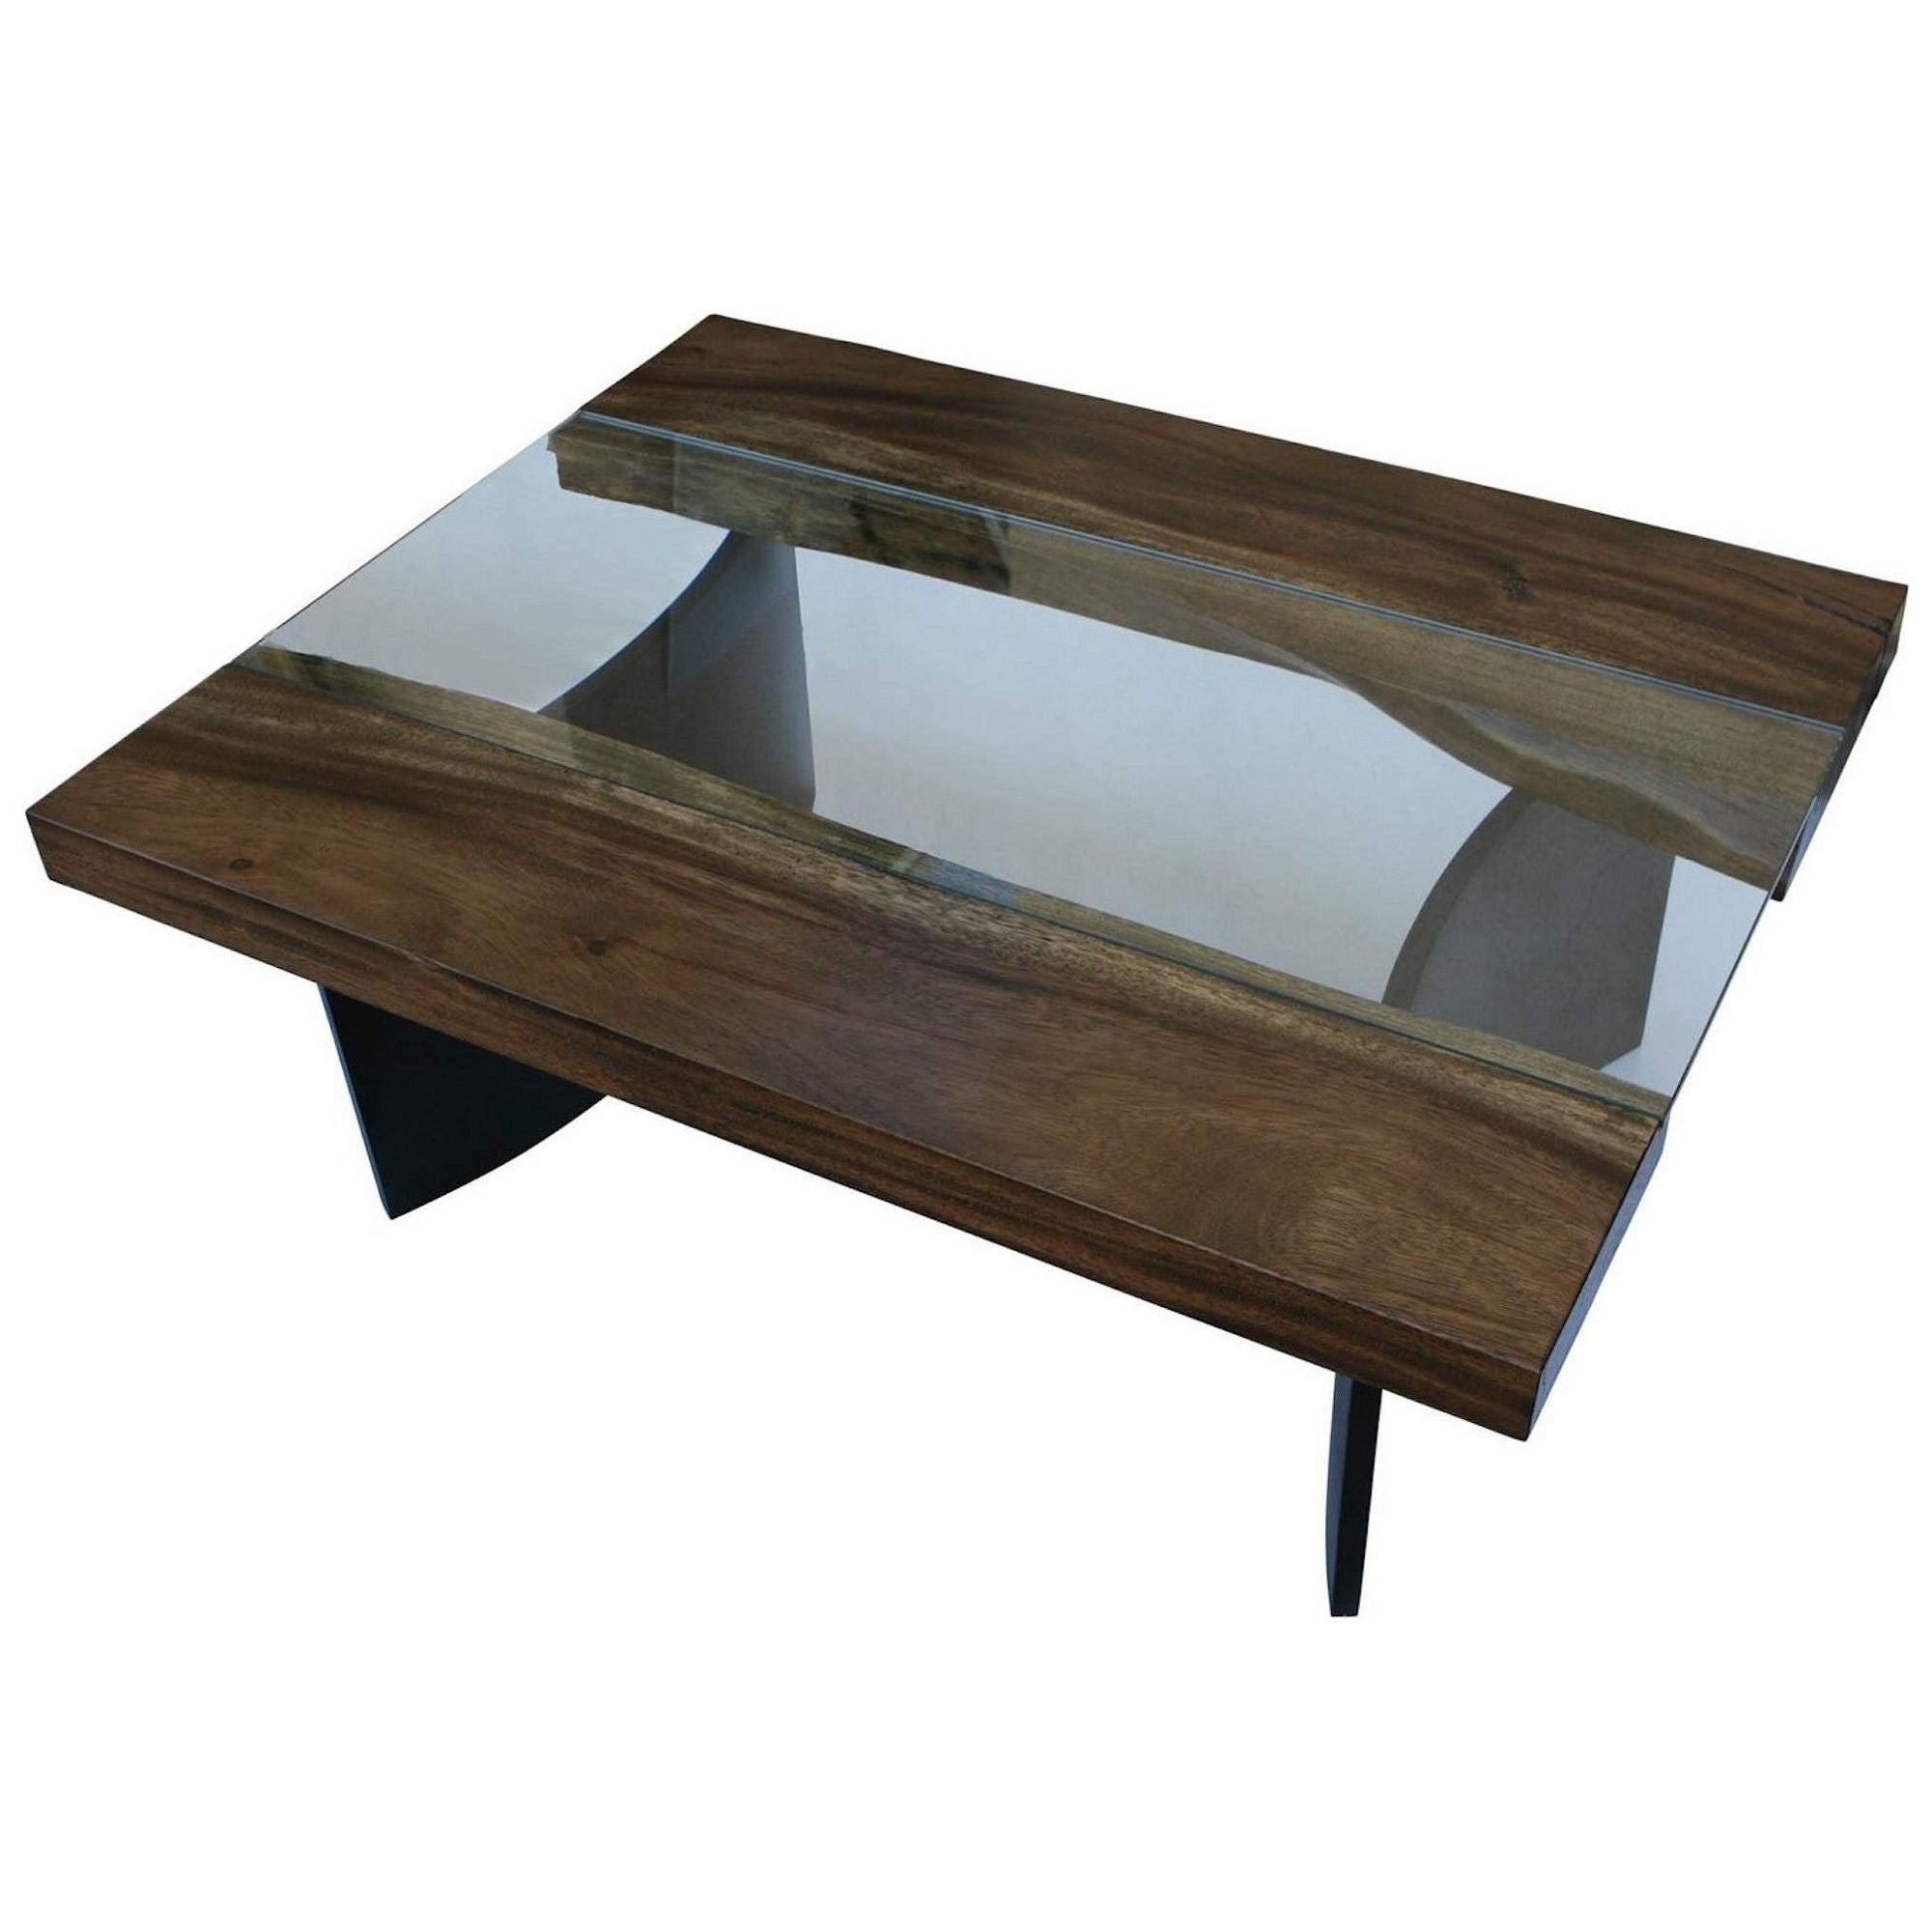 Live Edge Modern Industrial Coffee Table Mortise Tenon